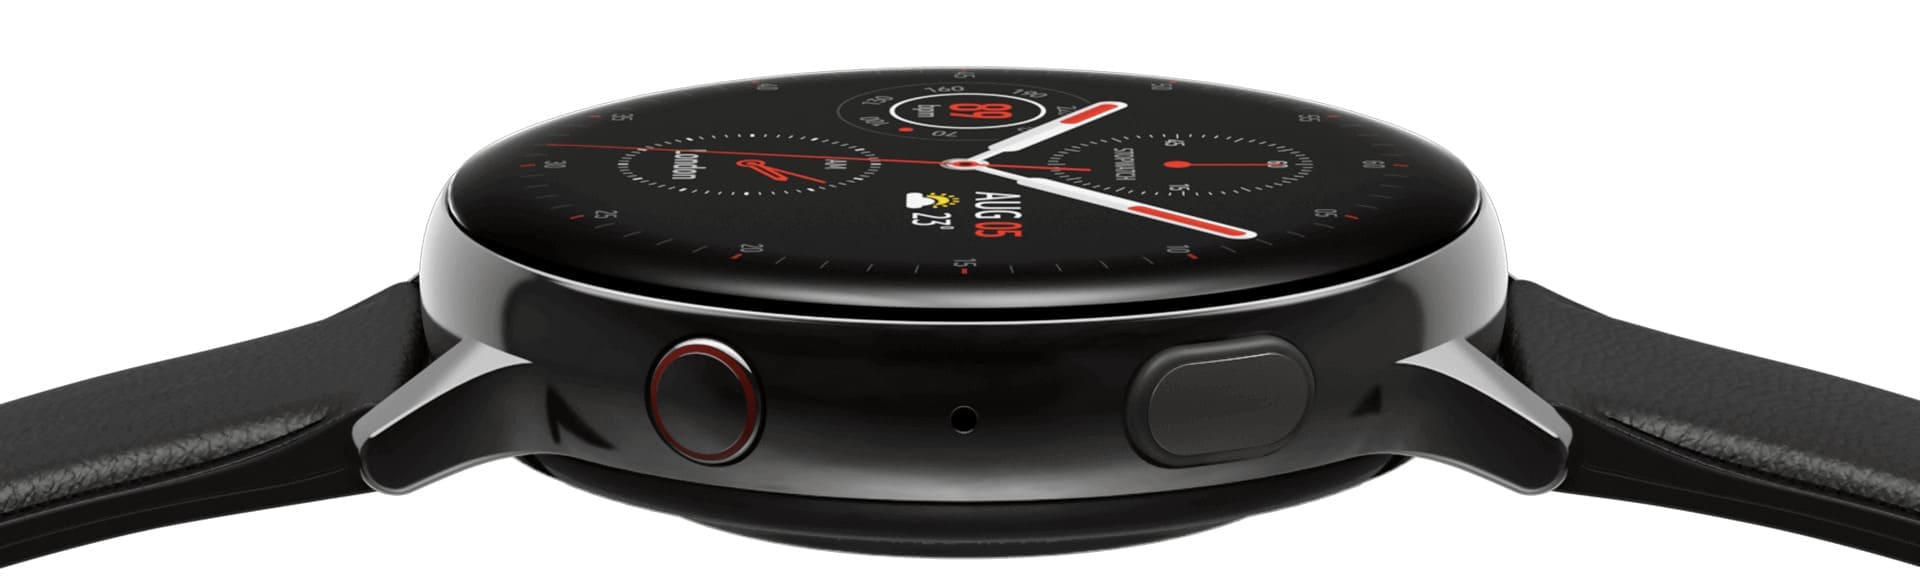 A Galaxy Watch active2 that rotates to display the rear side of the watch, the side view with the two buttons in the foreground, and finally the front side which shows the watch face.